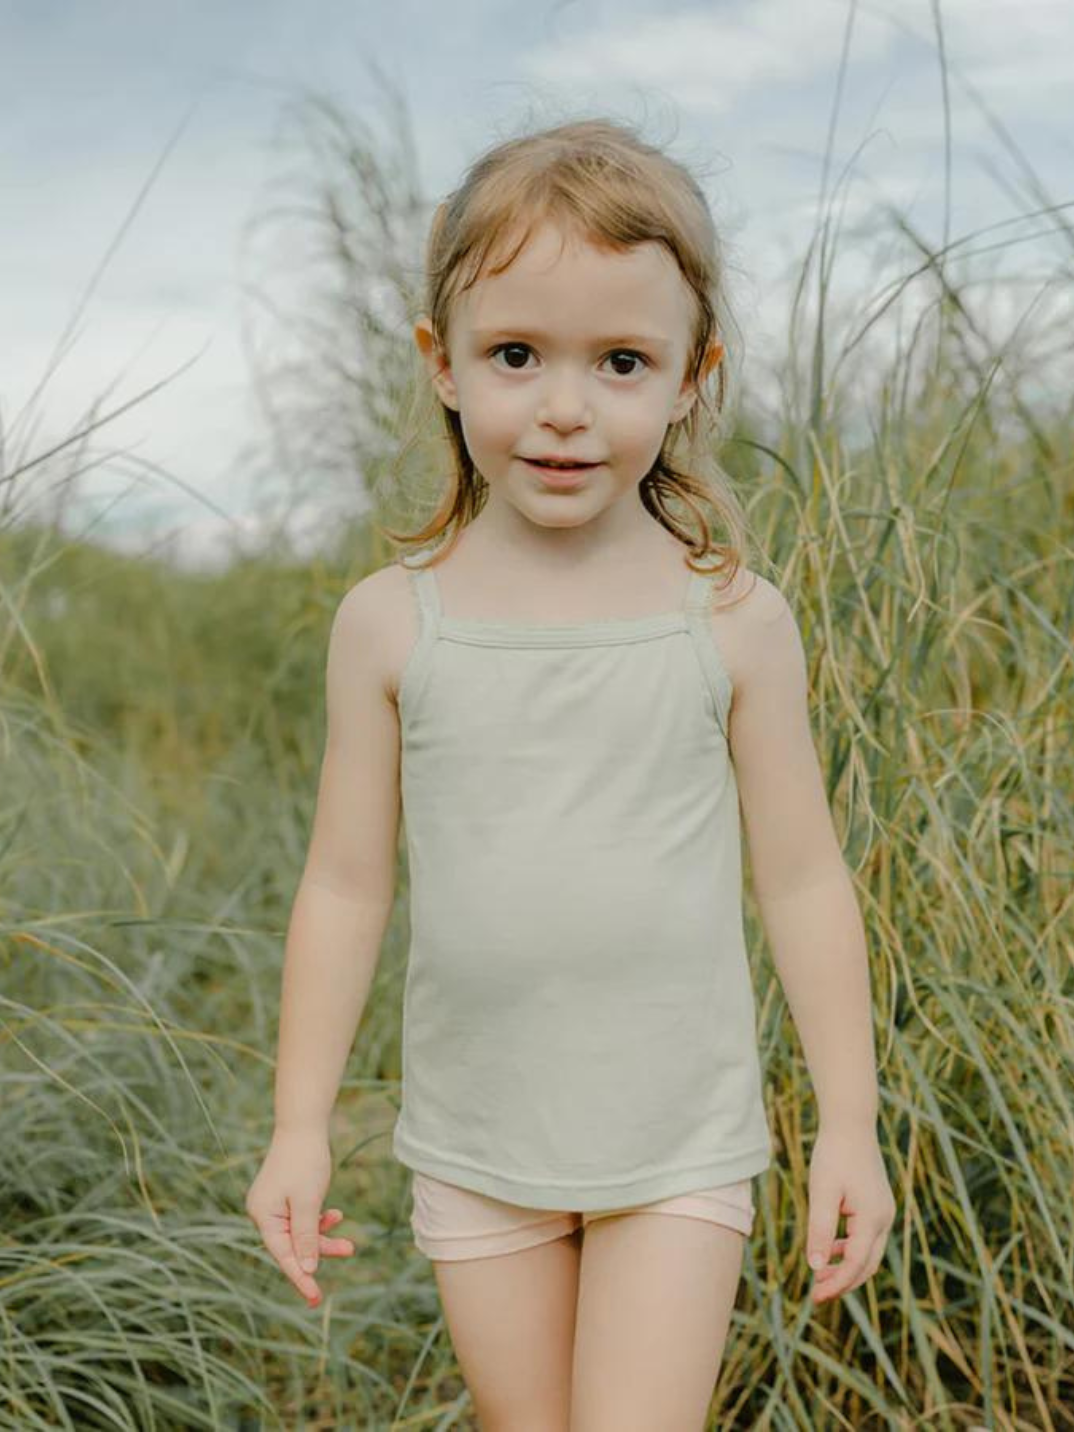 Kids camisoles light green trendy children's fashion sustainable brand eco-friendly Just Peachy Underwear is crafted in TENCEL™ Modal, fibers extracted from naturally grown beech wood by an environmentally responsible integrated pulp-to-fiber process. The FSC and Oeko Tex certified modal is biodegradable, free from harmful chemicals and interwoven using Micro technology for a finer quality of lightness and the softest touch.